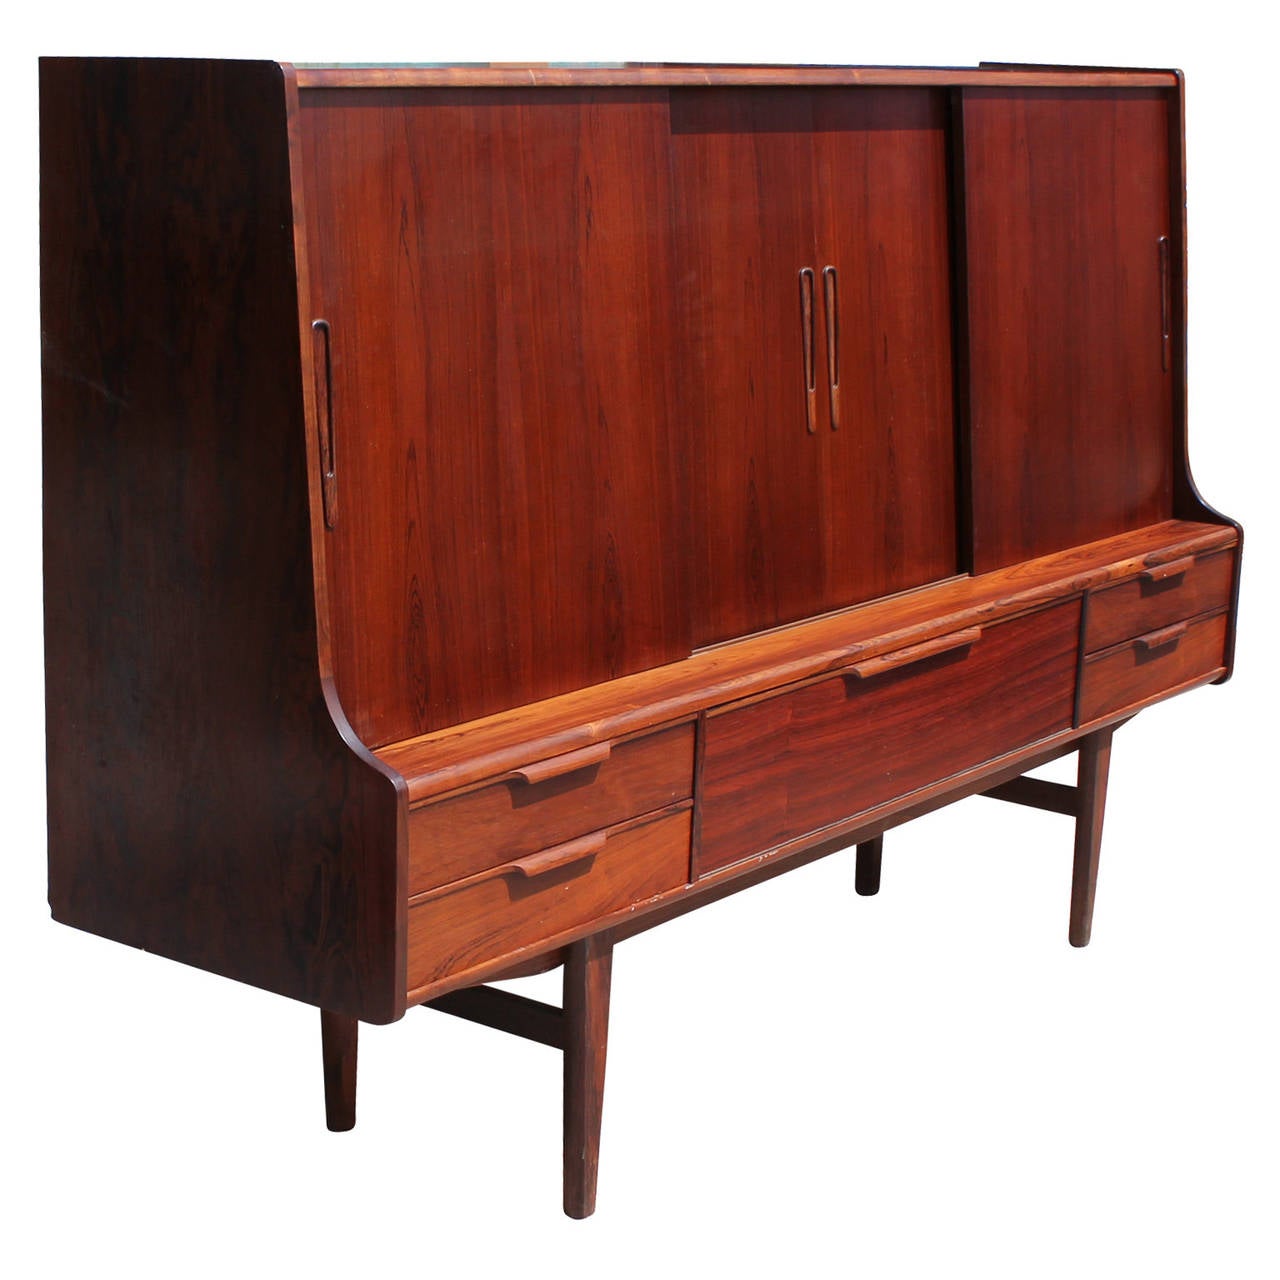 Tall rosewood credenza with sliding doors. Sliding doors on left and right open to reveal adjustable shelves. Center portion opens up to a dry bar complete with etched mirror back and three felt lined service drawers. Four drawers below sliding